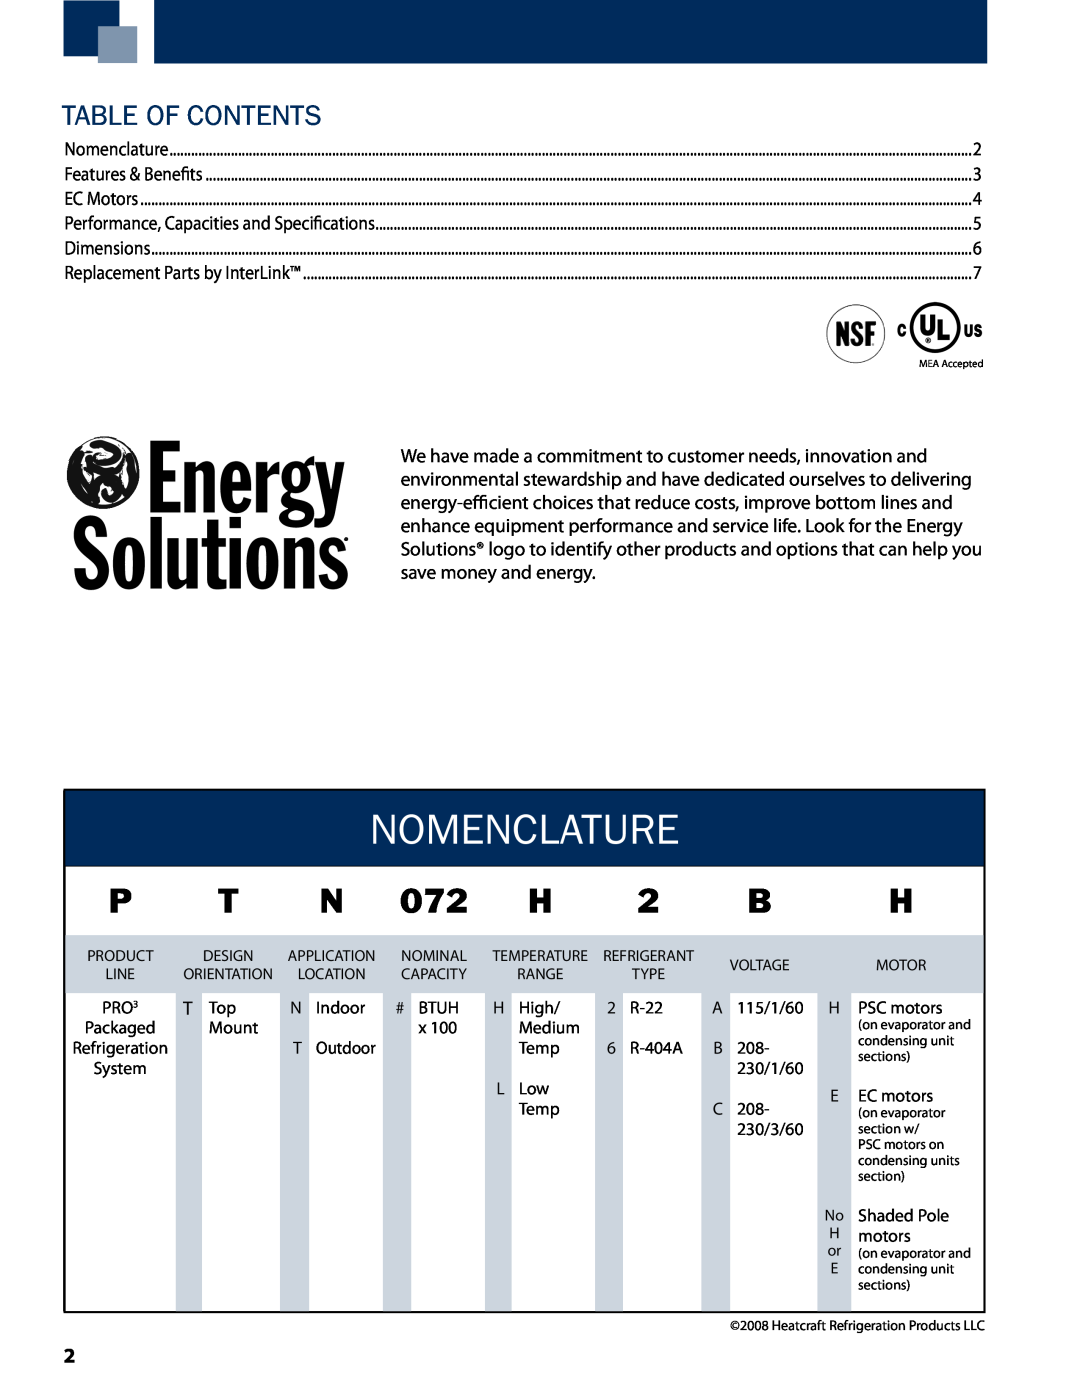 Heatcraft Refrigeration Products PTT, PTN manual Table of Contents, Nomenclature 